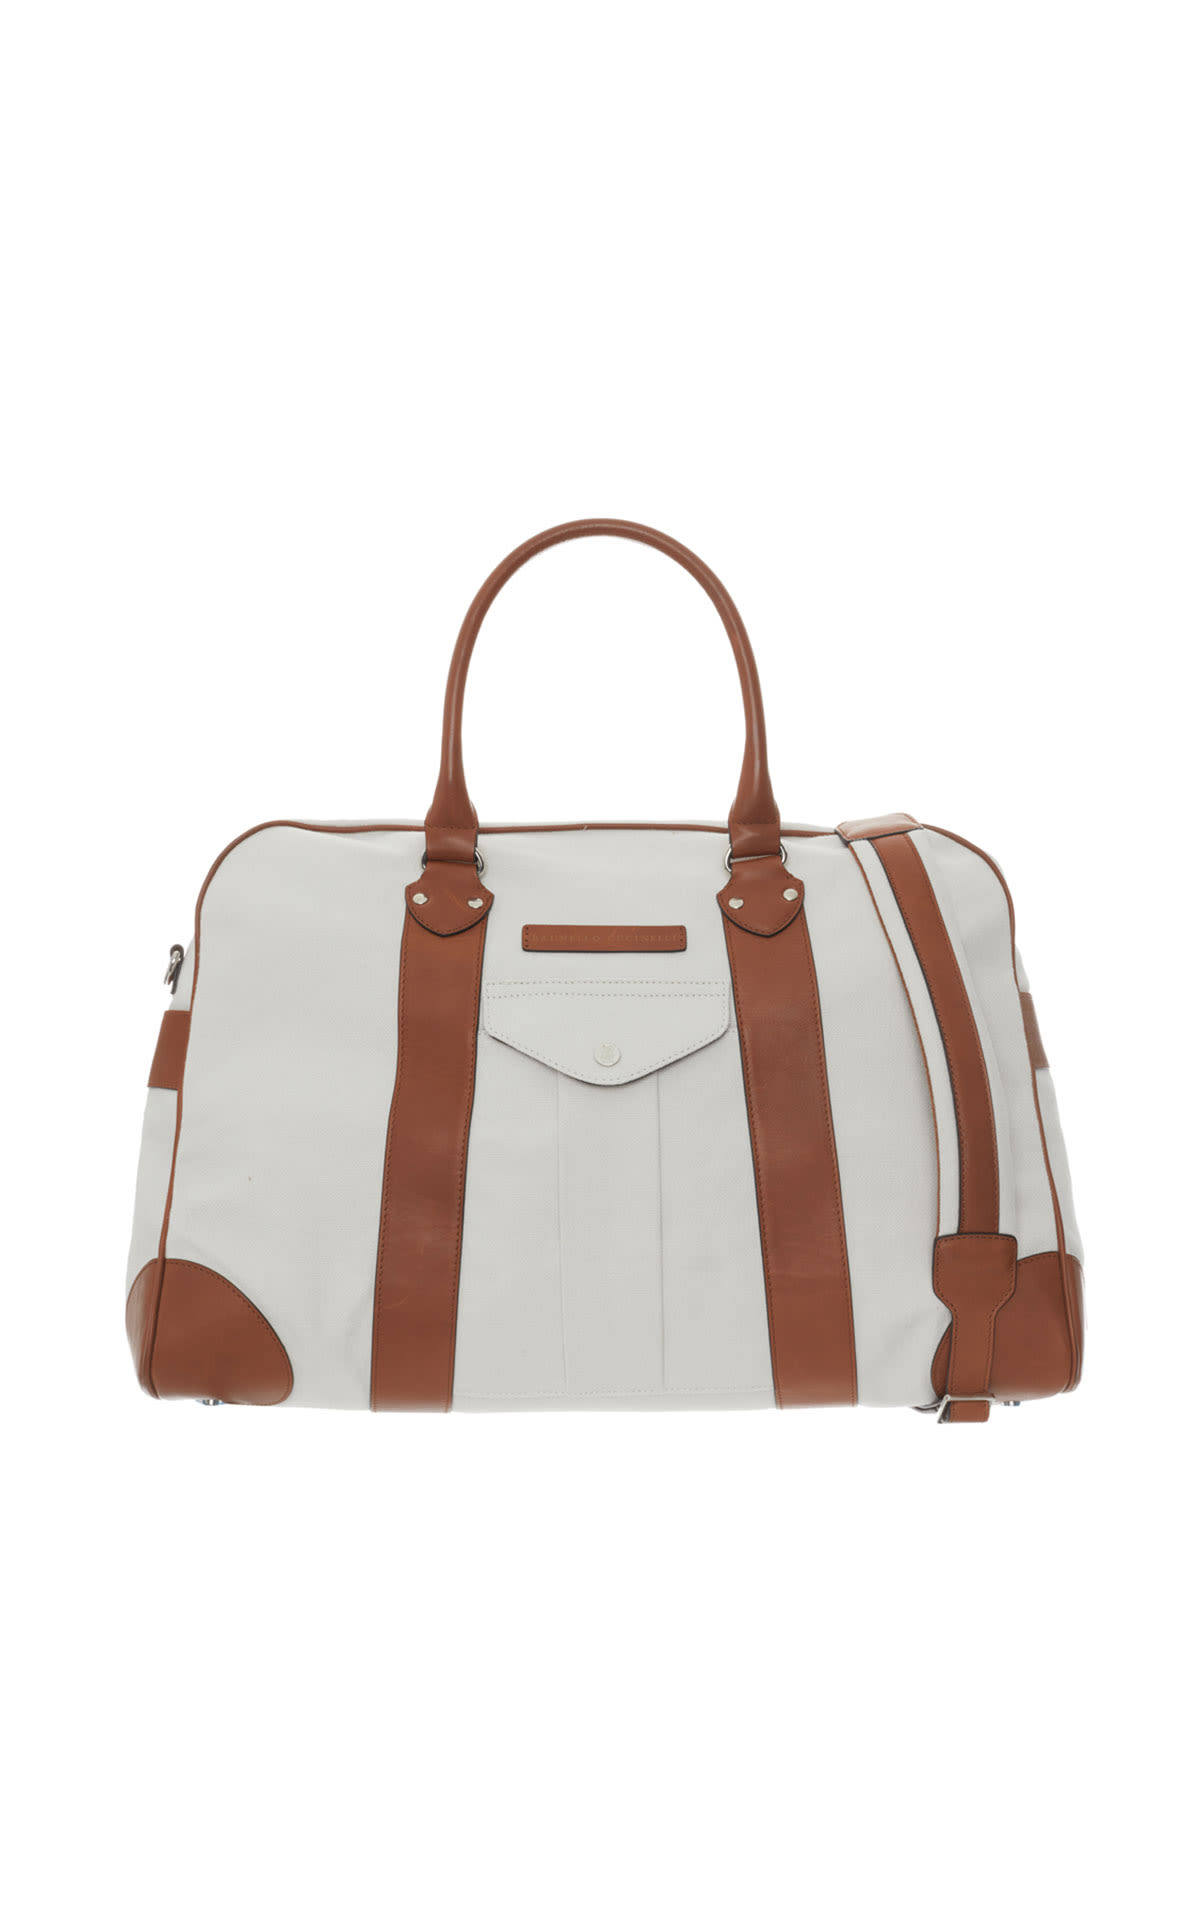 Brunello Cucinelli Canvas with leather trim carryall from Bicester Village